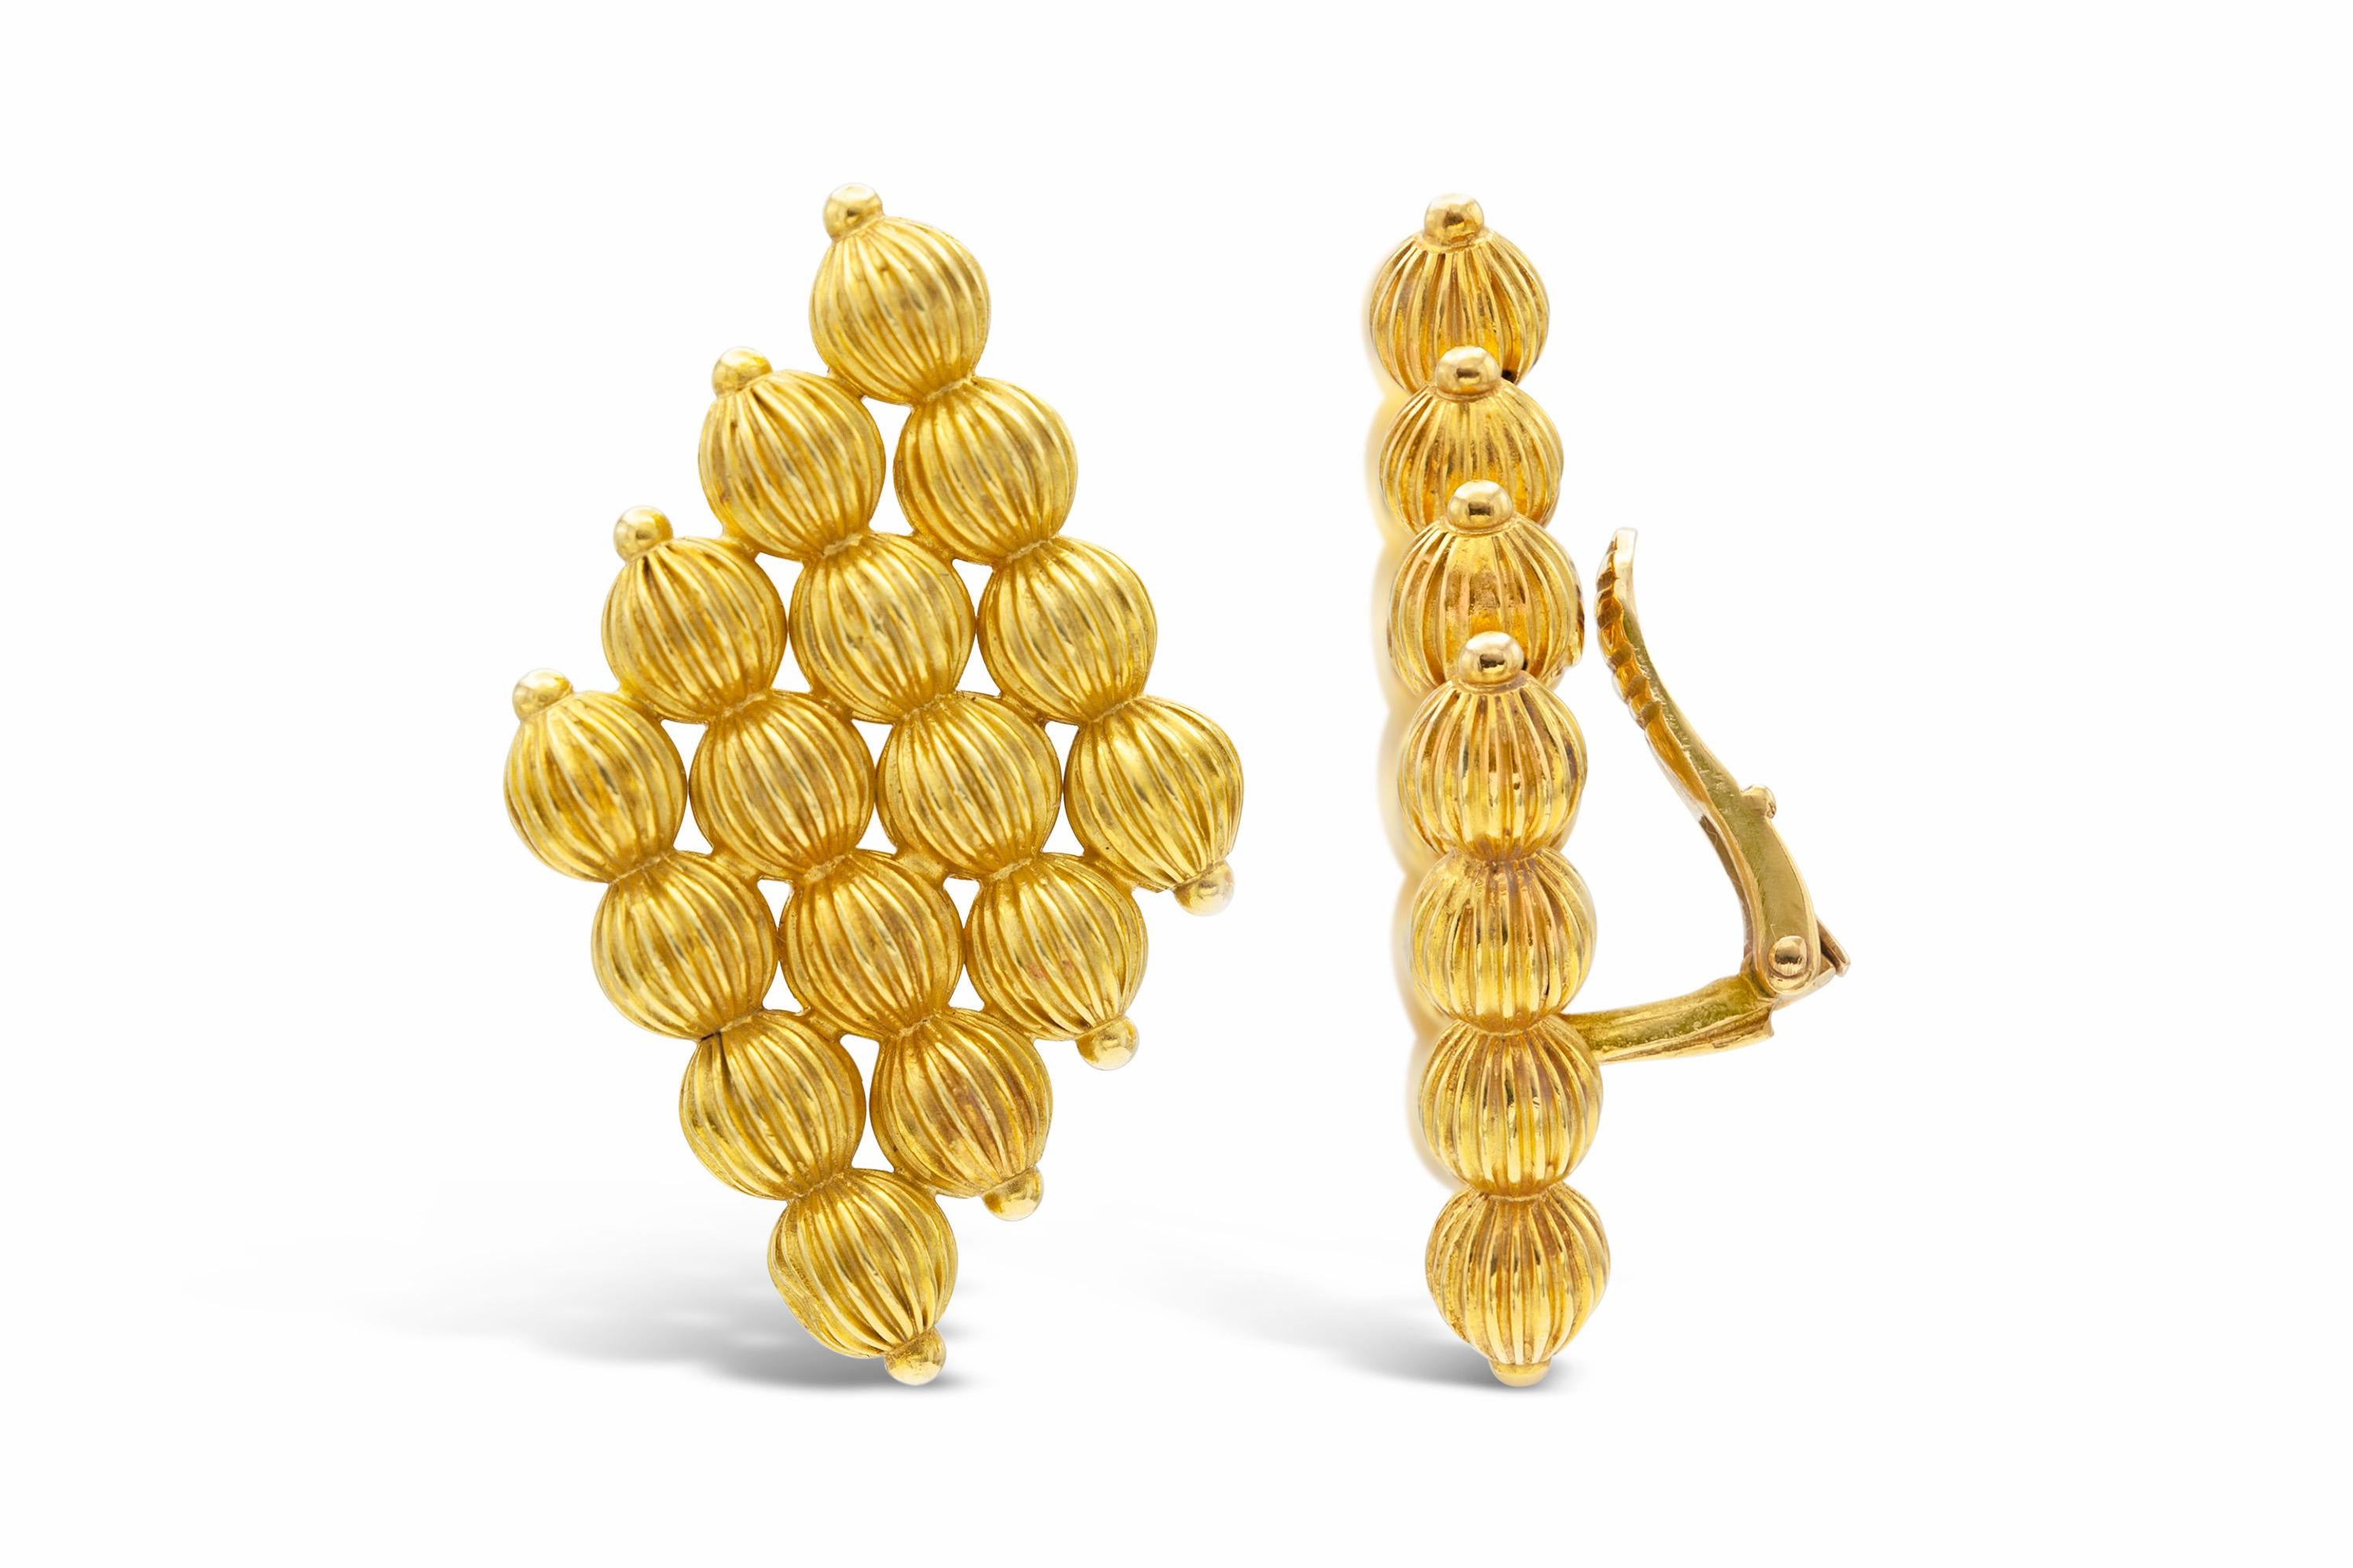 Finely crafted in 18k yellow gold.
Signed by Ilias Lalaouis